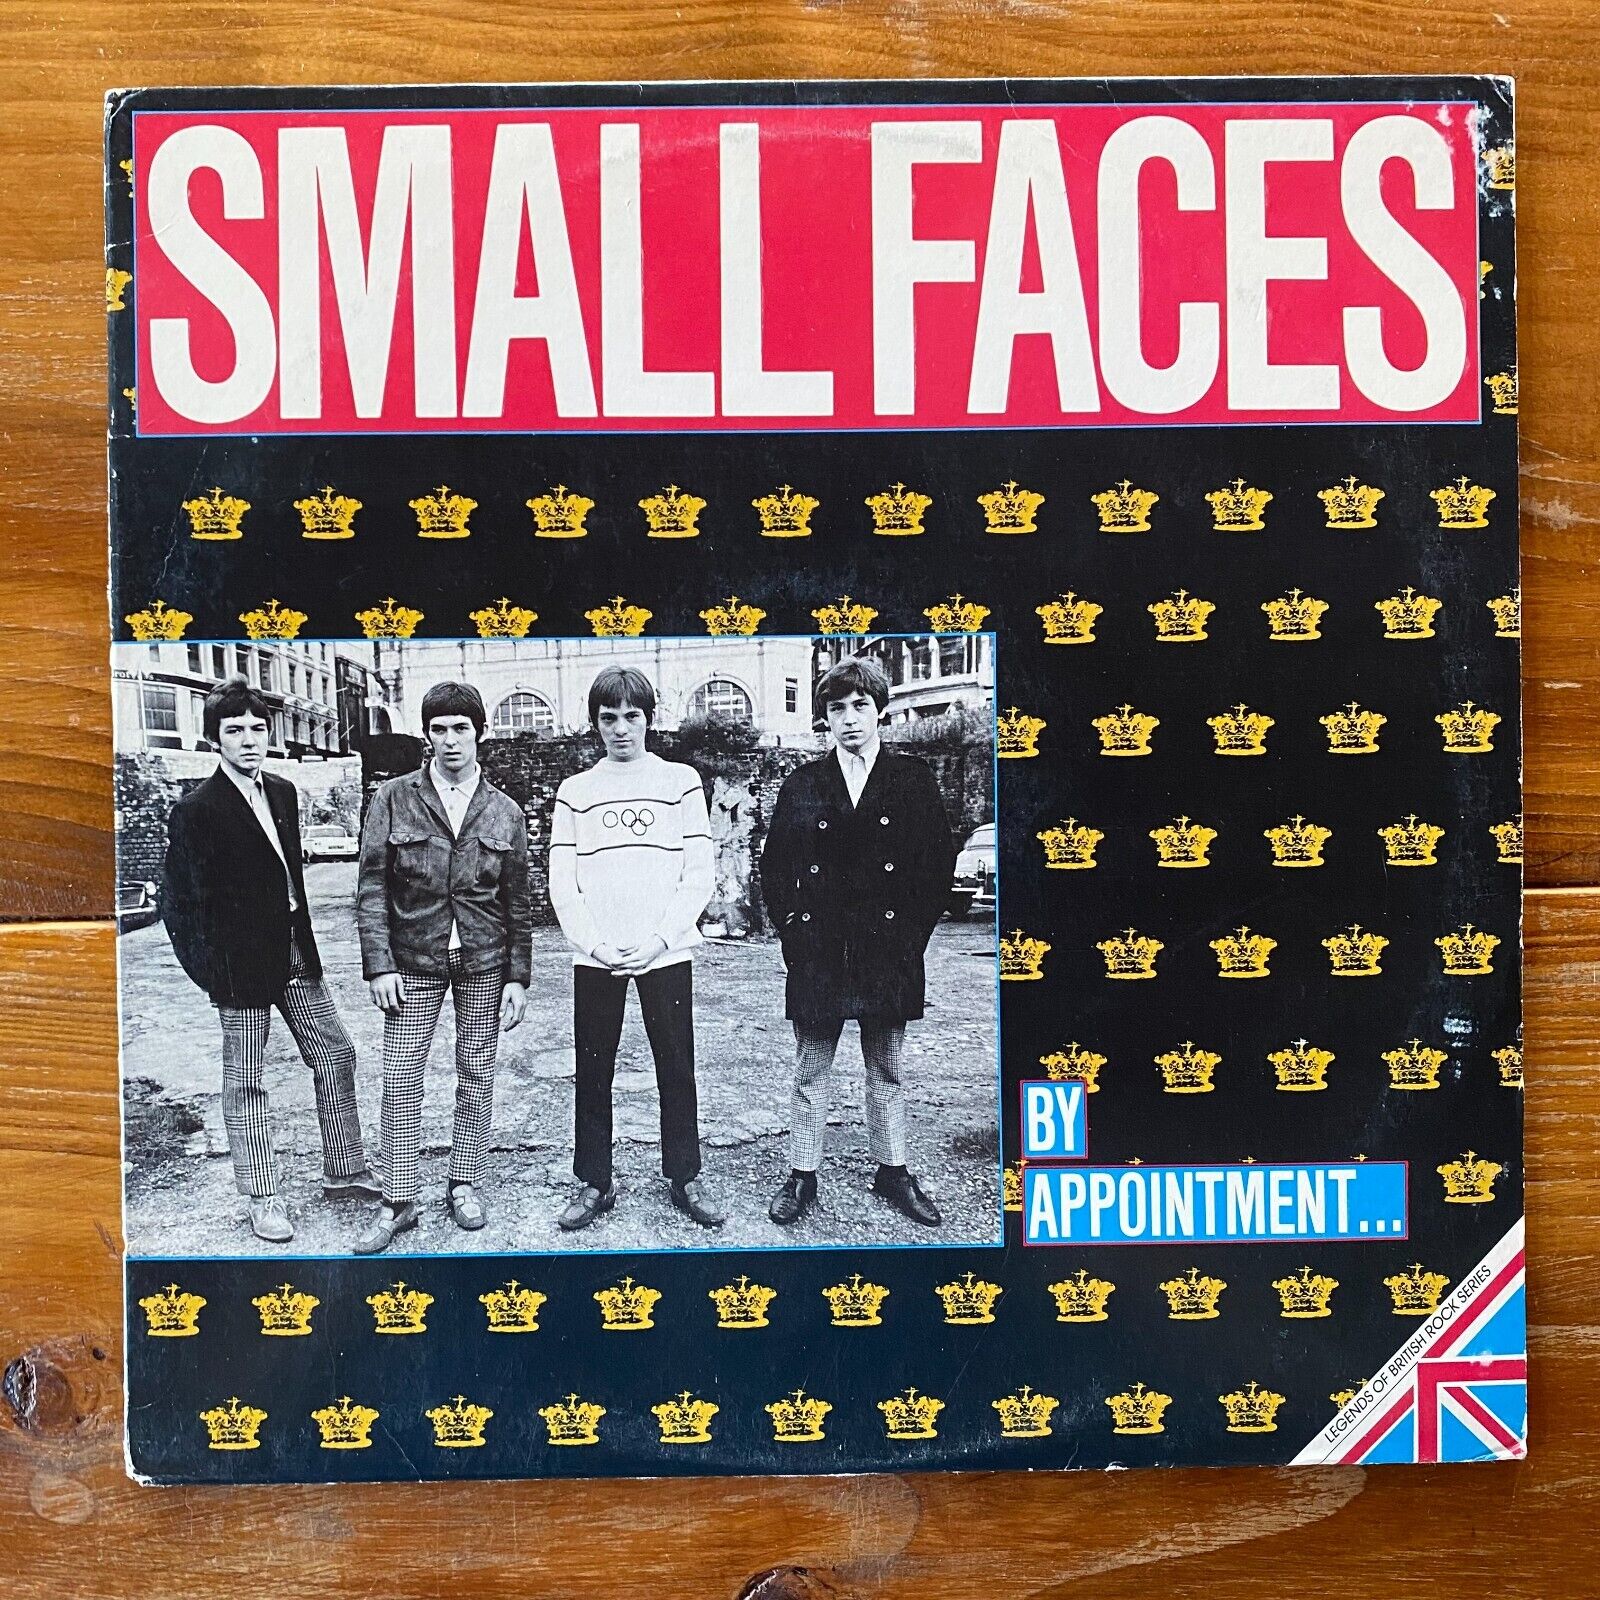 Small Faces – By Appointment… - Psych Rock-Mod Vinyl LP – Steve Marriott - OG